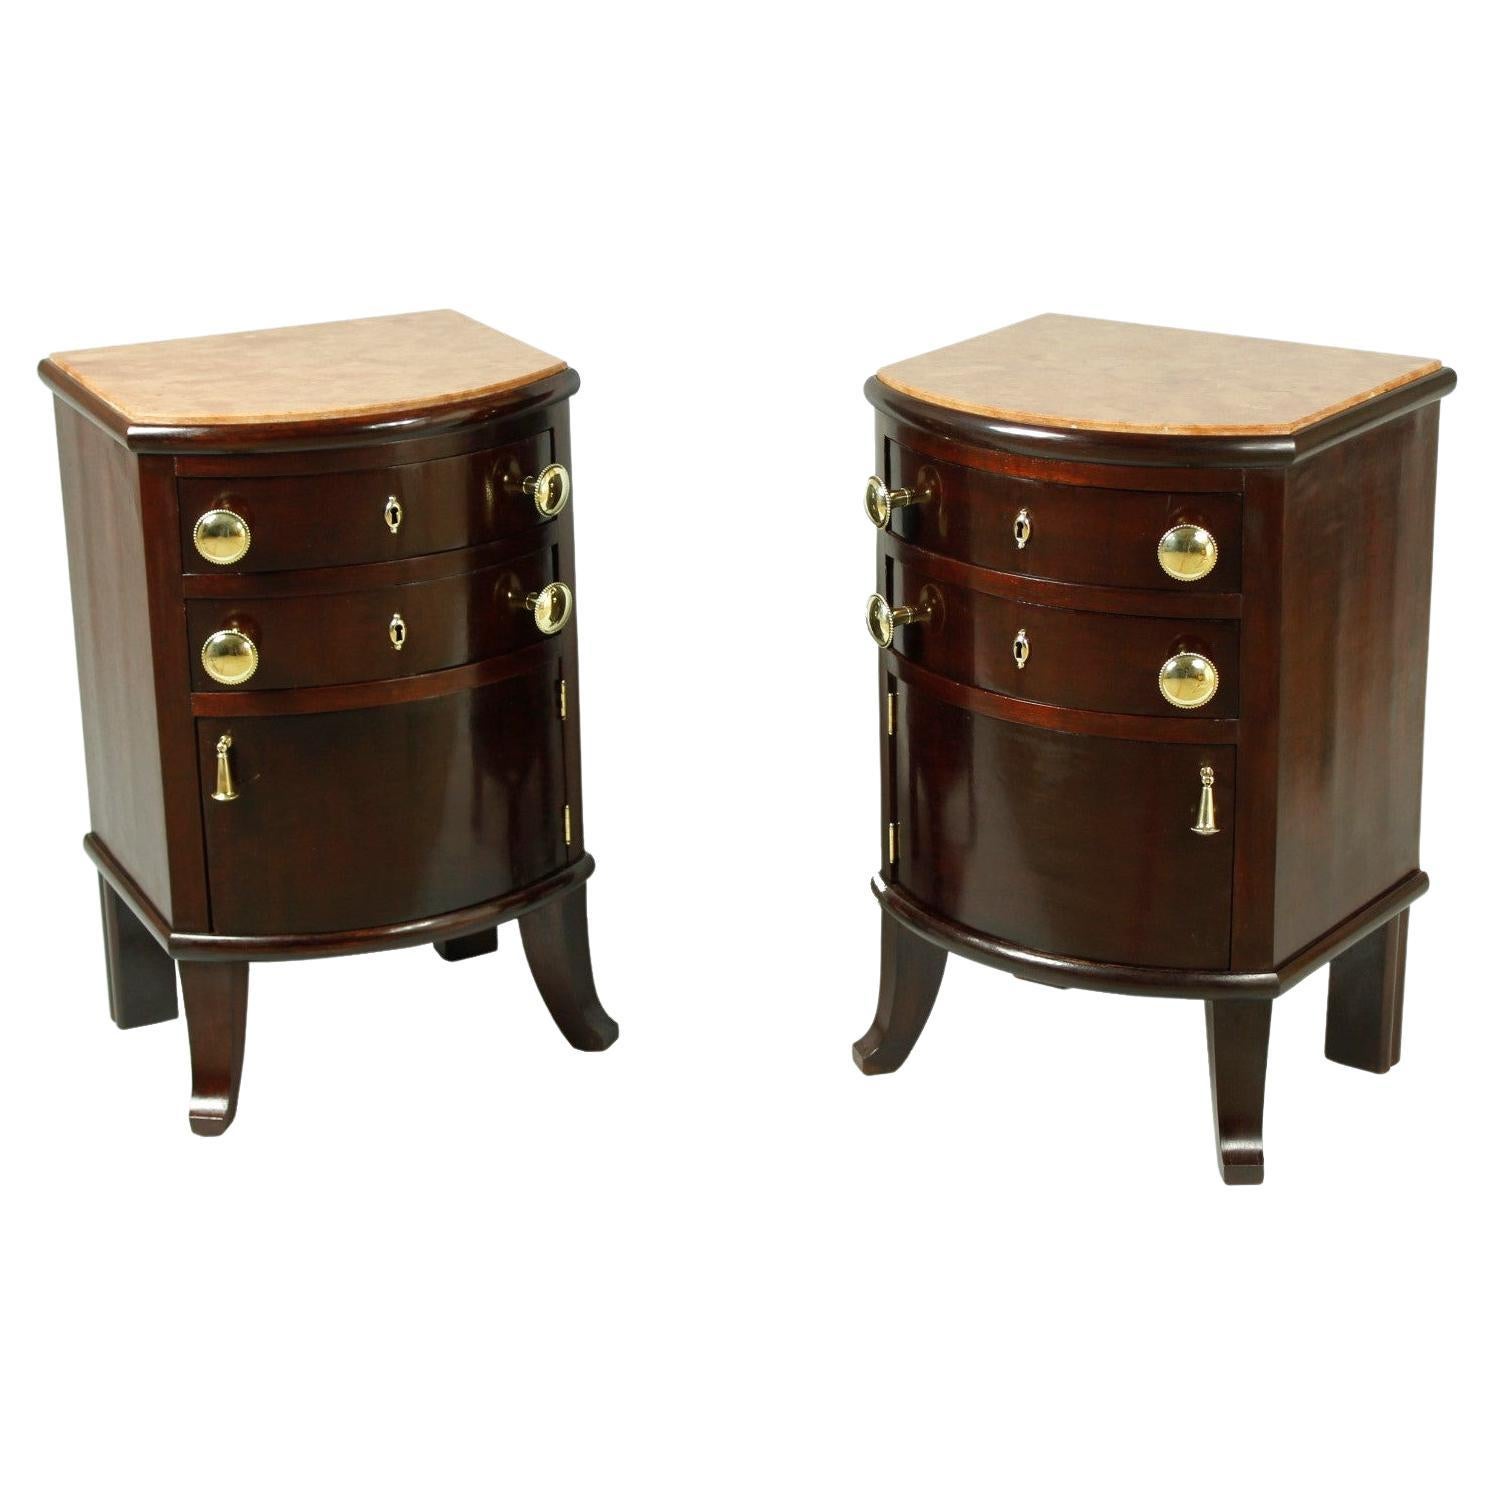 Pair of Antique Walnut and Mahogany Night Stands with Marble Top, 1920s For Sale